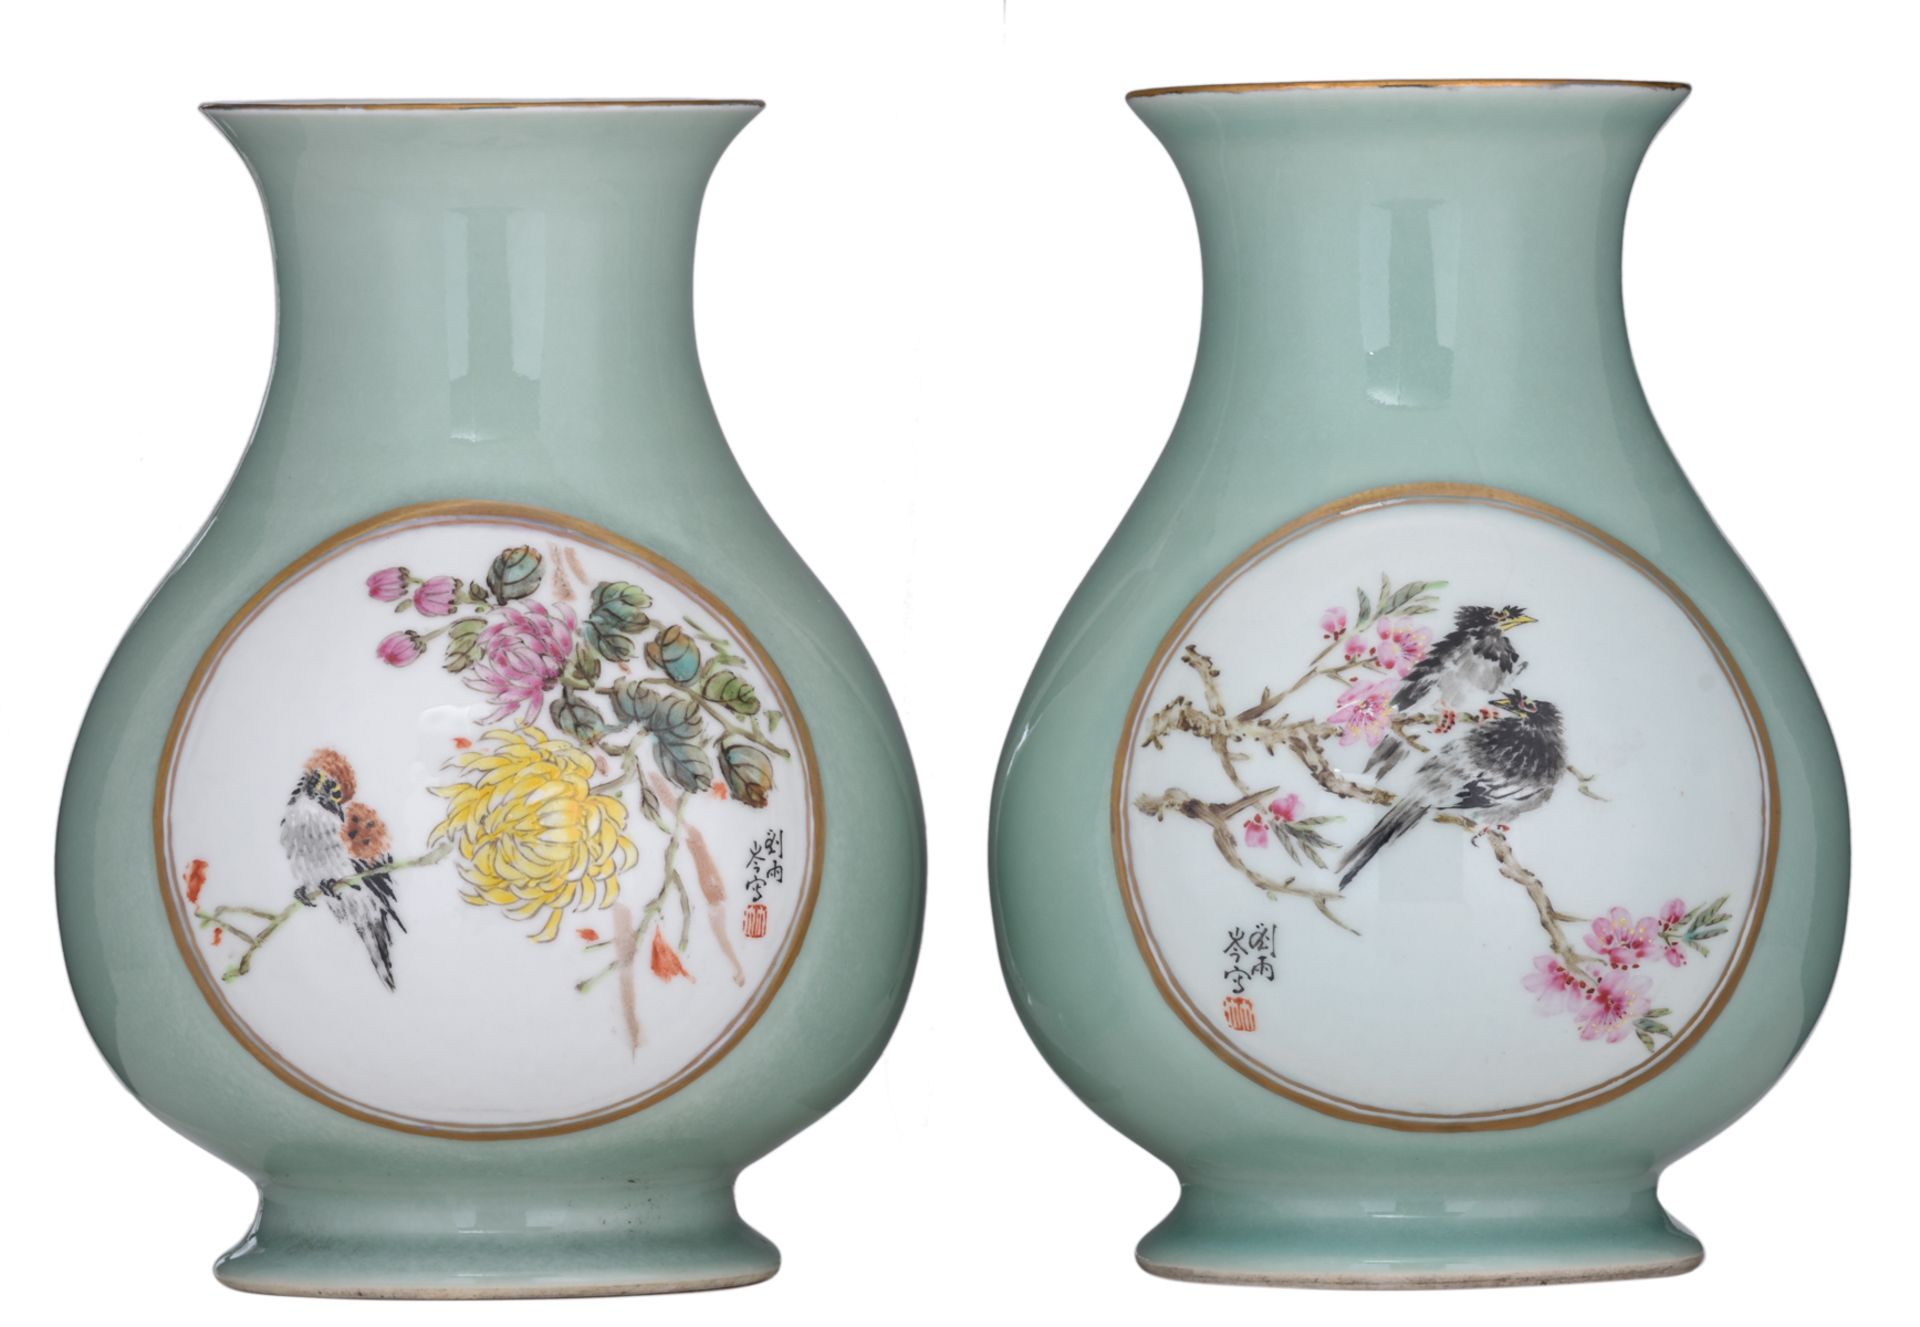 Two Chinese celadon-glazed hu vases, the roundels decorated with birds on flower branches, depicting